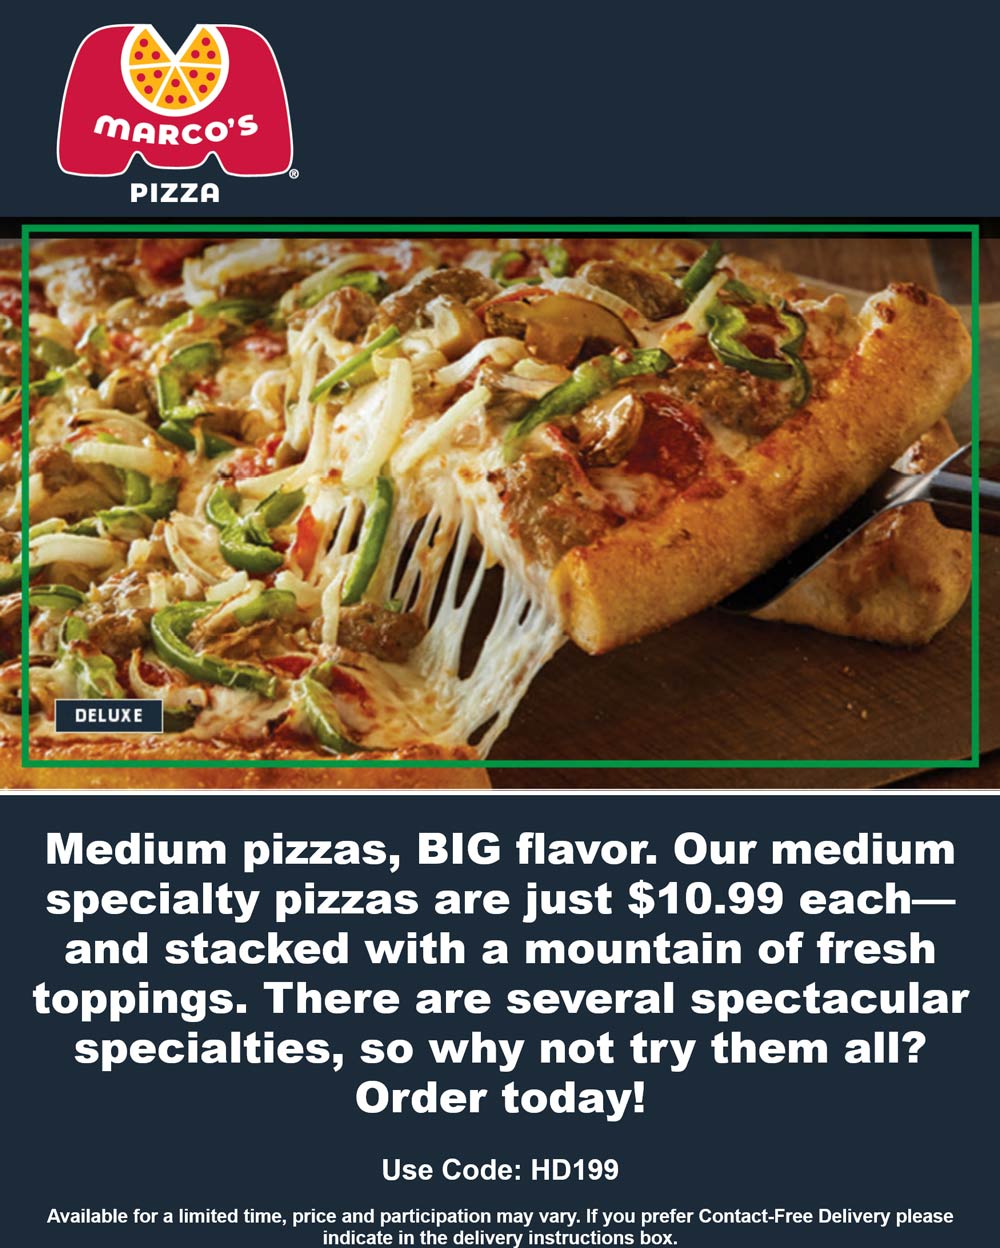 Marcos Pizza restaurants Coupon  Medium specialty pizzas for $11 at Marcos Pizza via promo code HD199 #marcospizza 